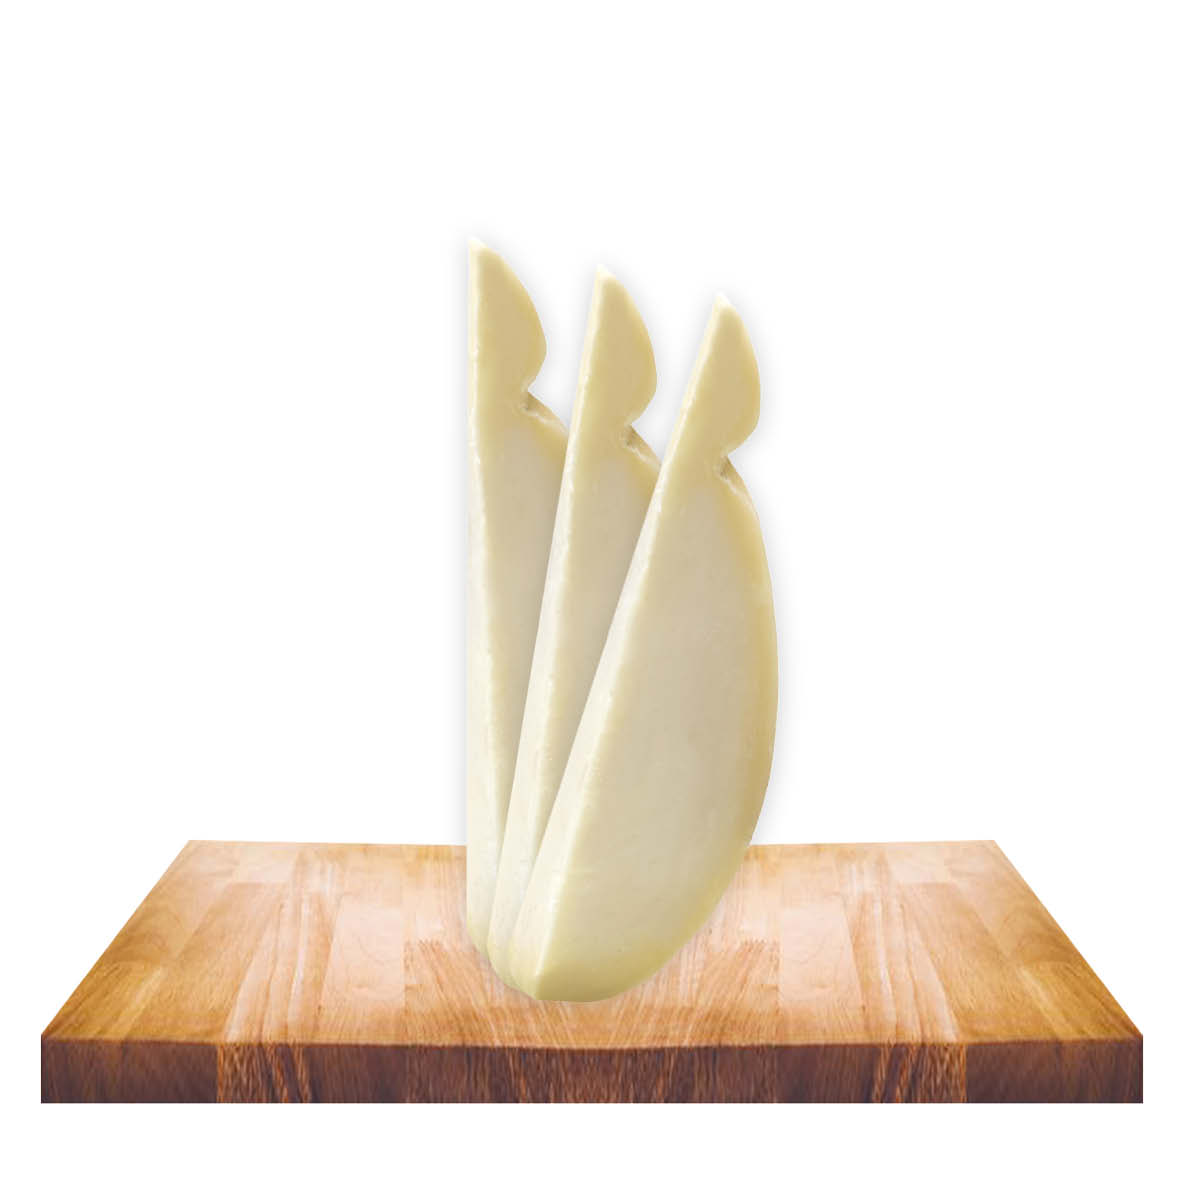 Aged Provola cheese wedges